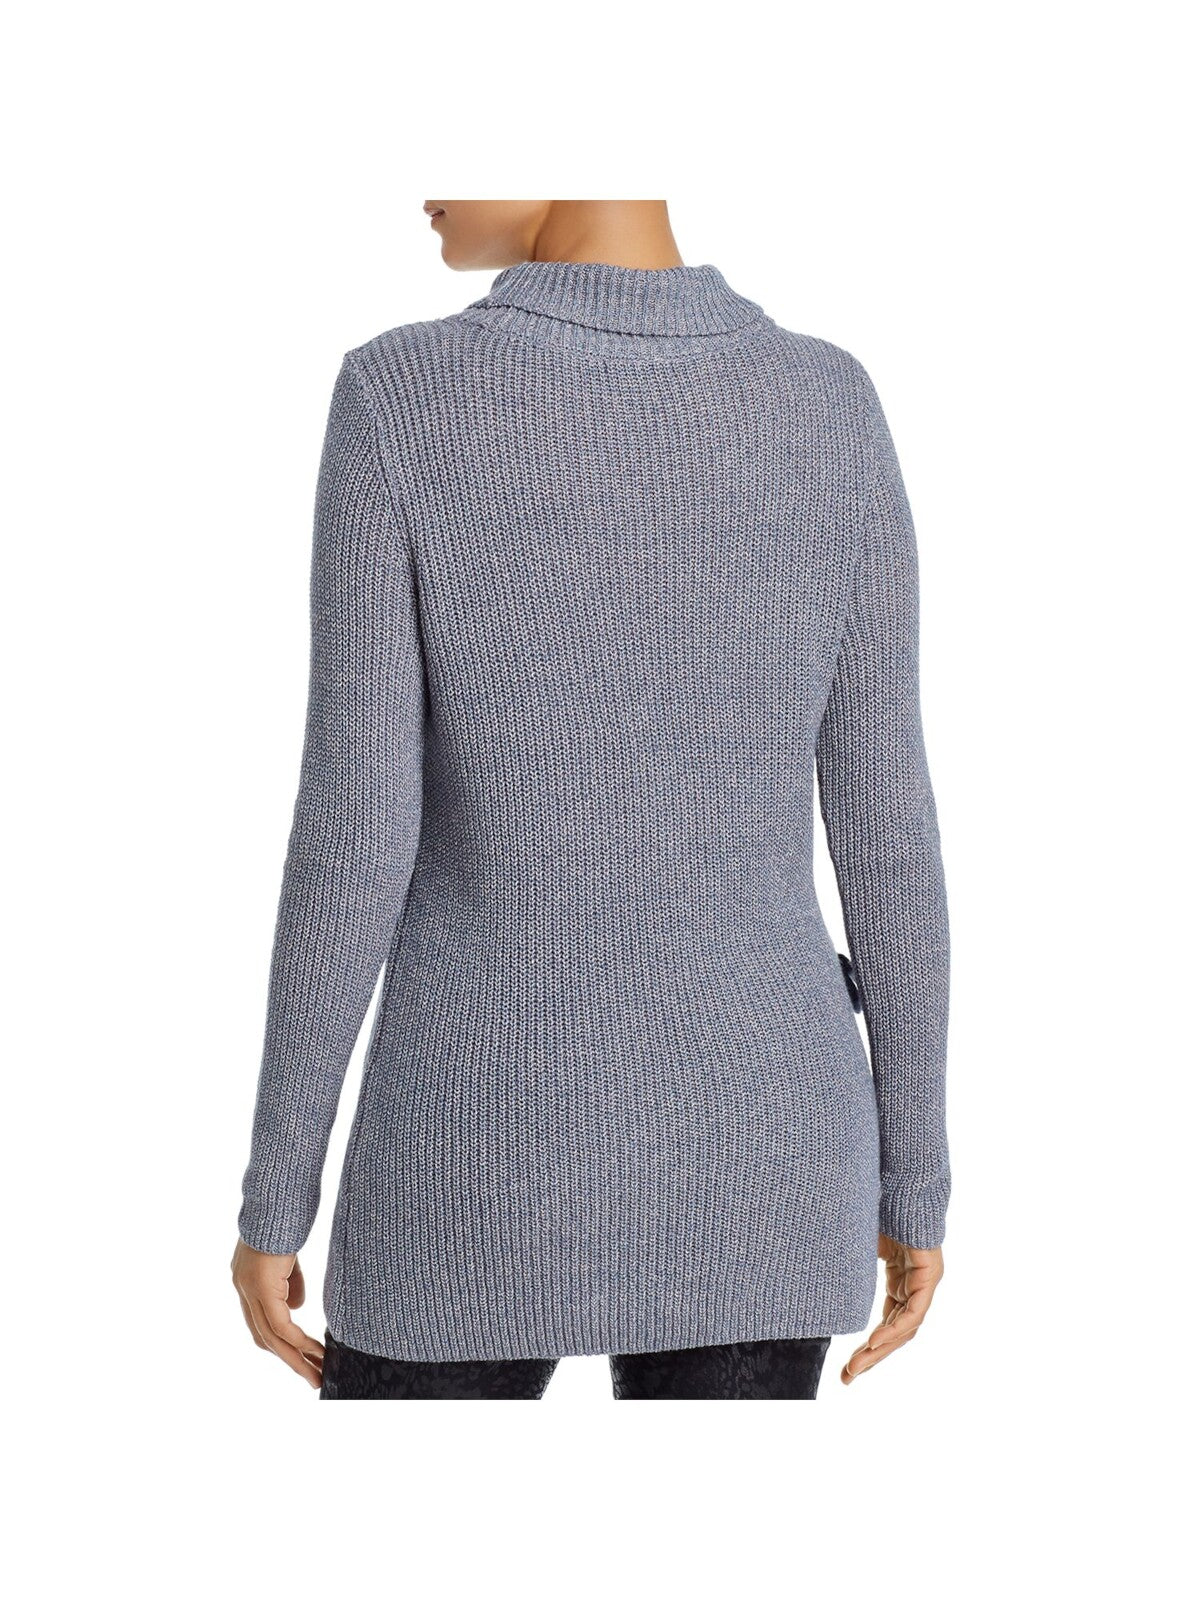 NIC+ZOE Womens Blue Stretch Textured Ribbed Woven Side-tie Contrast Long Sleeve Turtle Neck Tunic Sweater XS